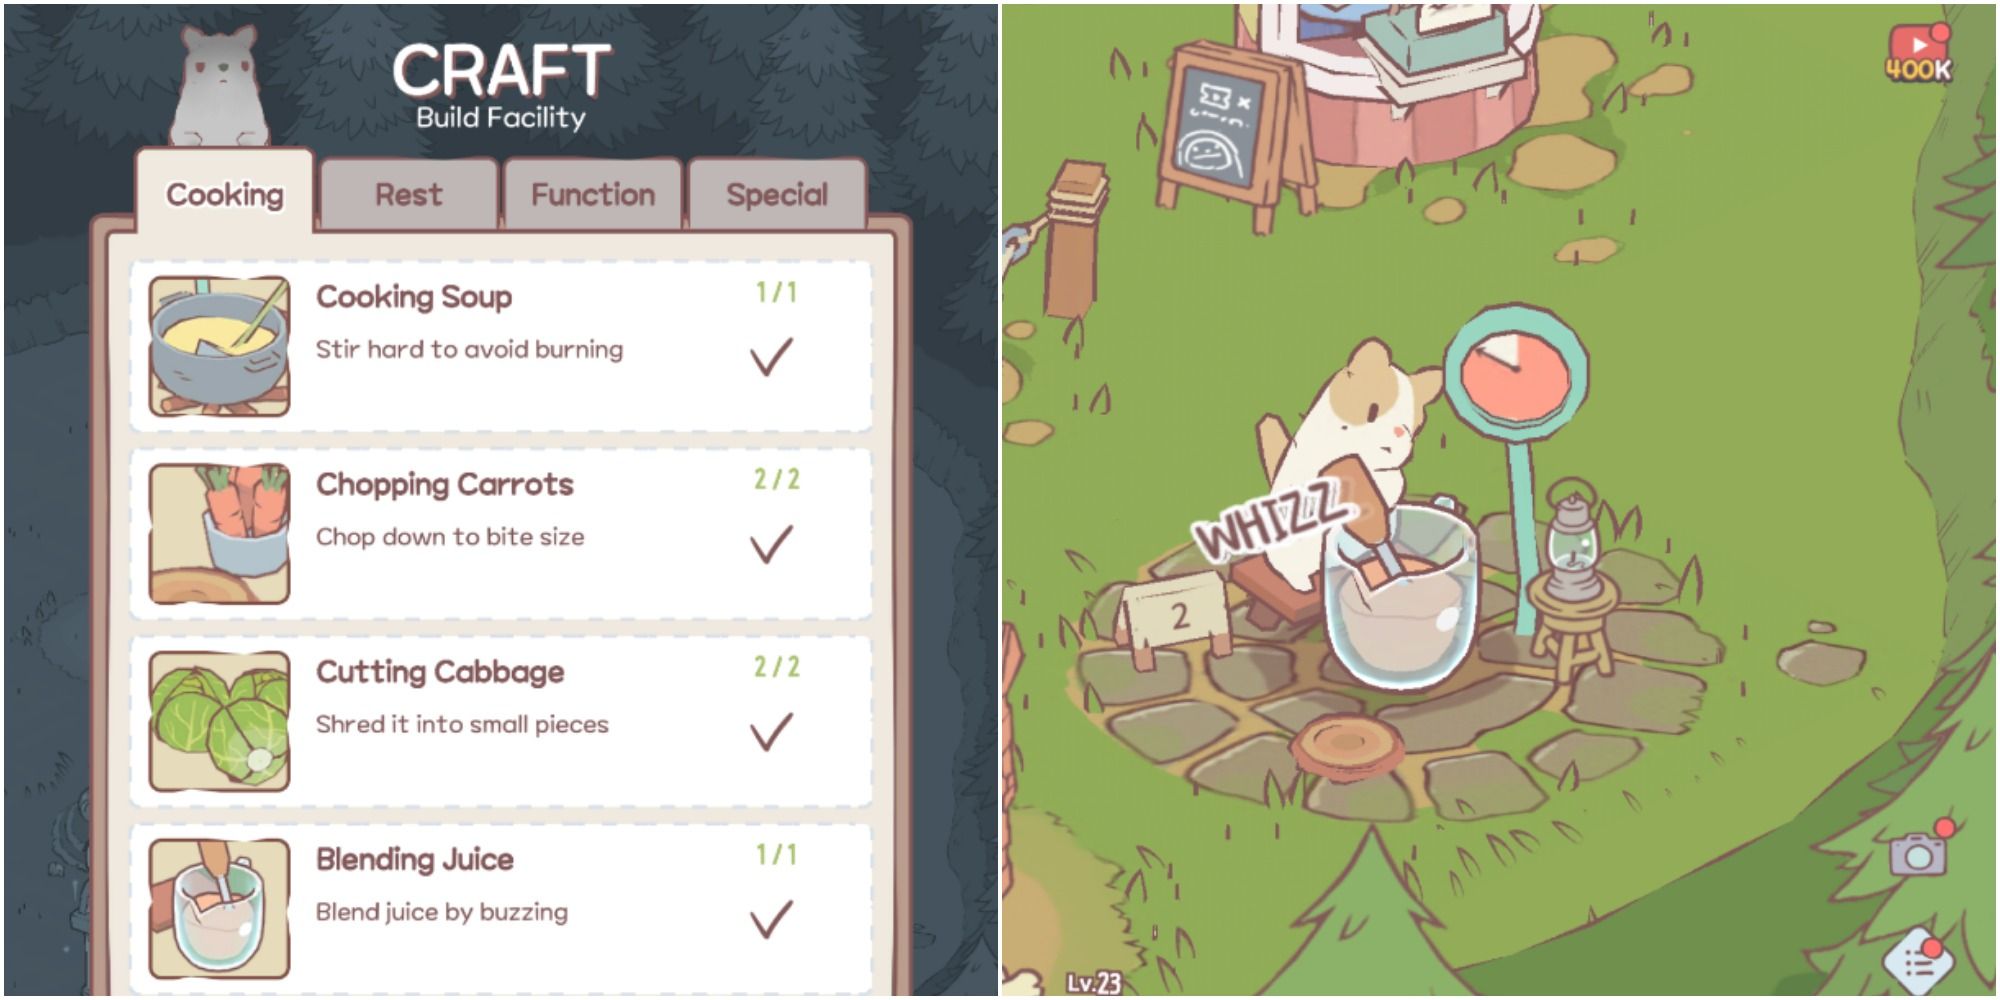 Split image of crafting menu and cat blending juice in a pitcher